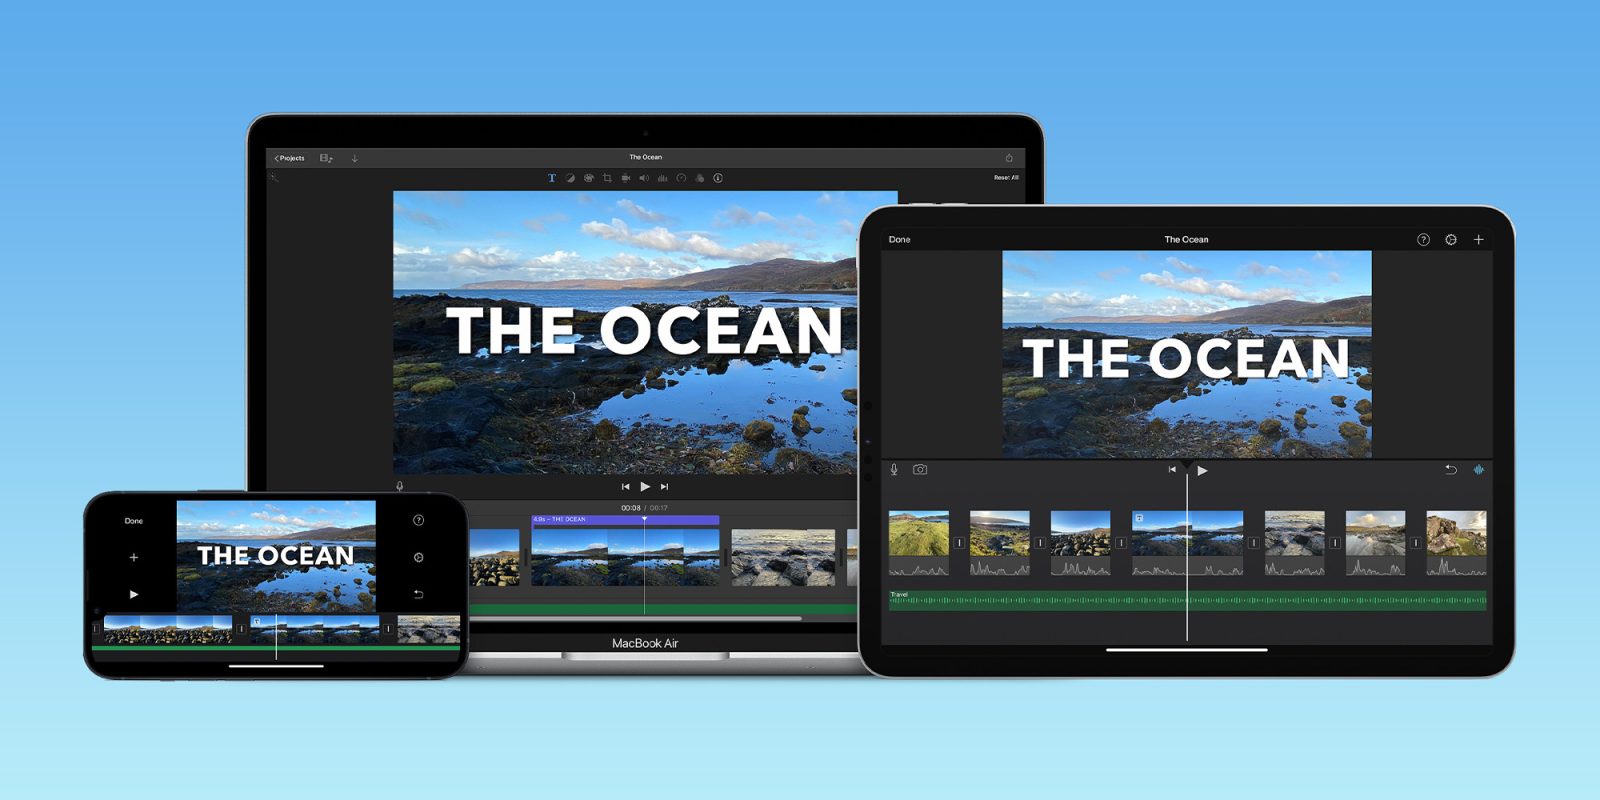 iMovie update teased at Apple event – more to come in April - 9to5Mac